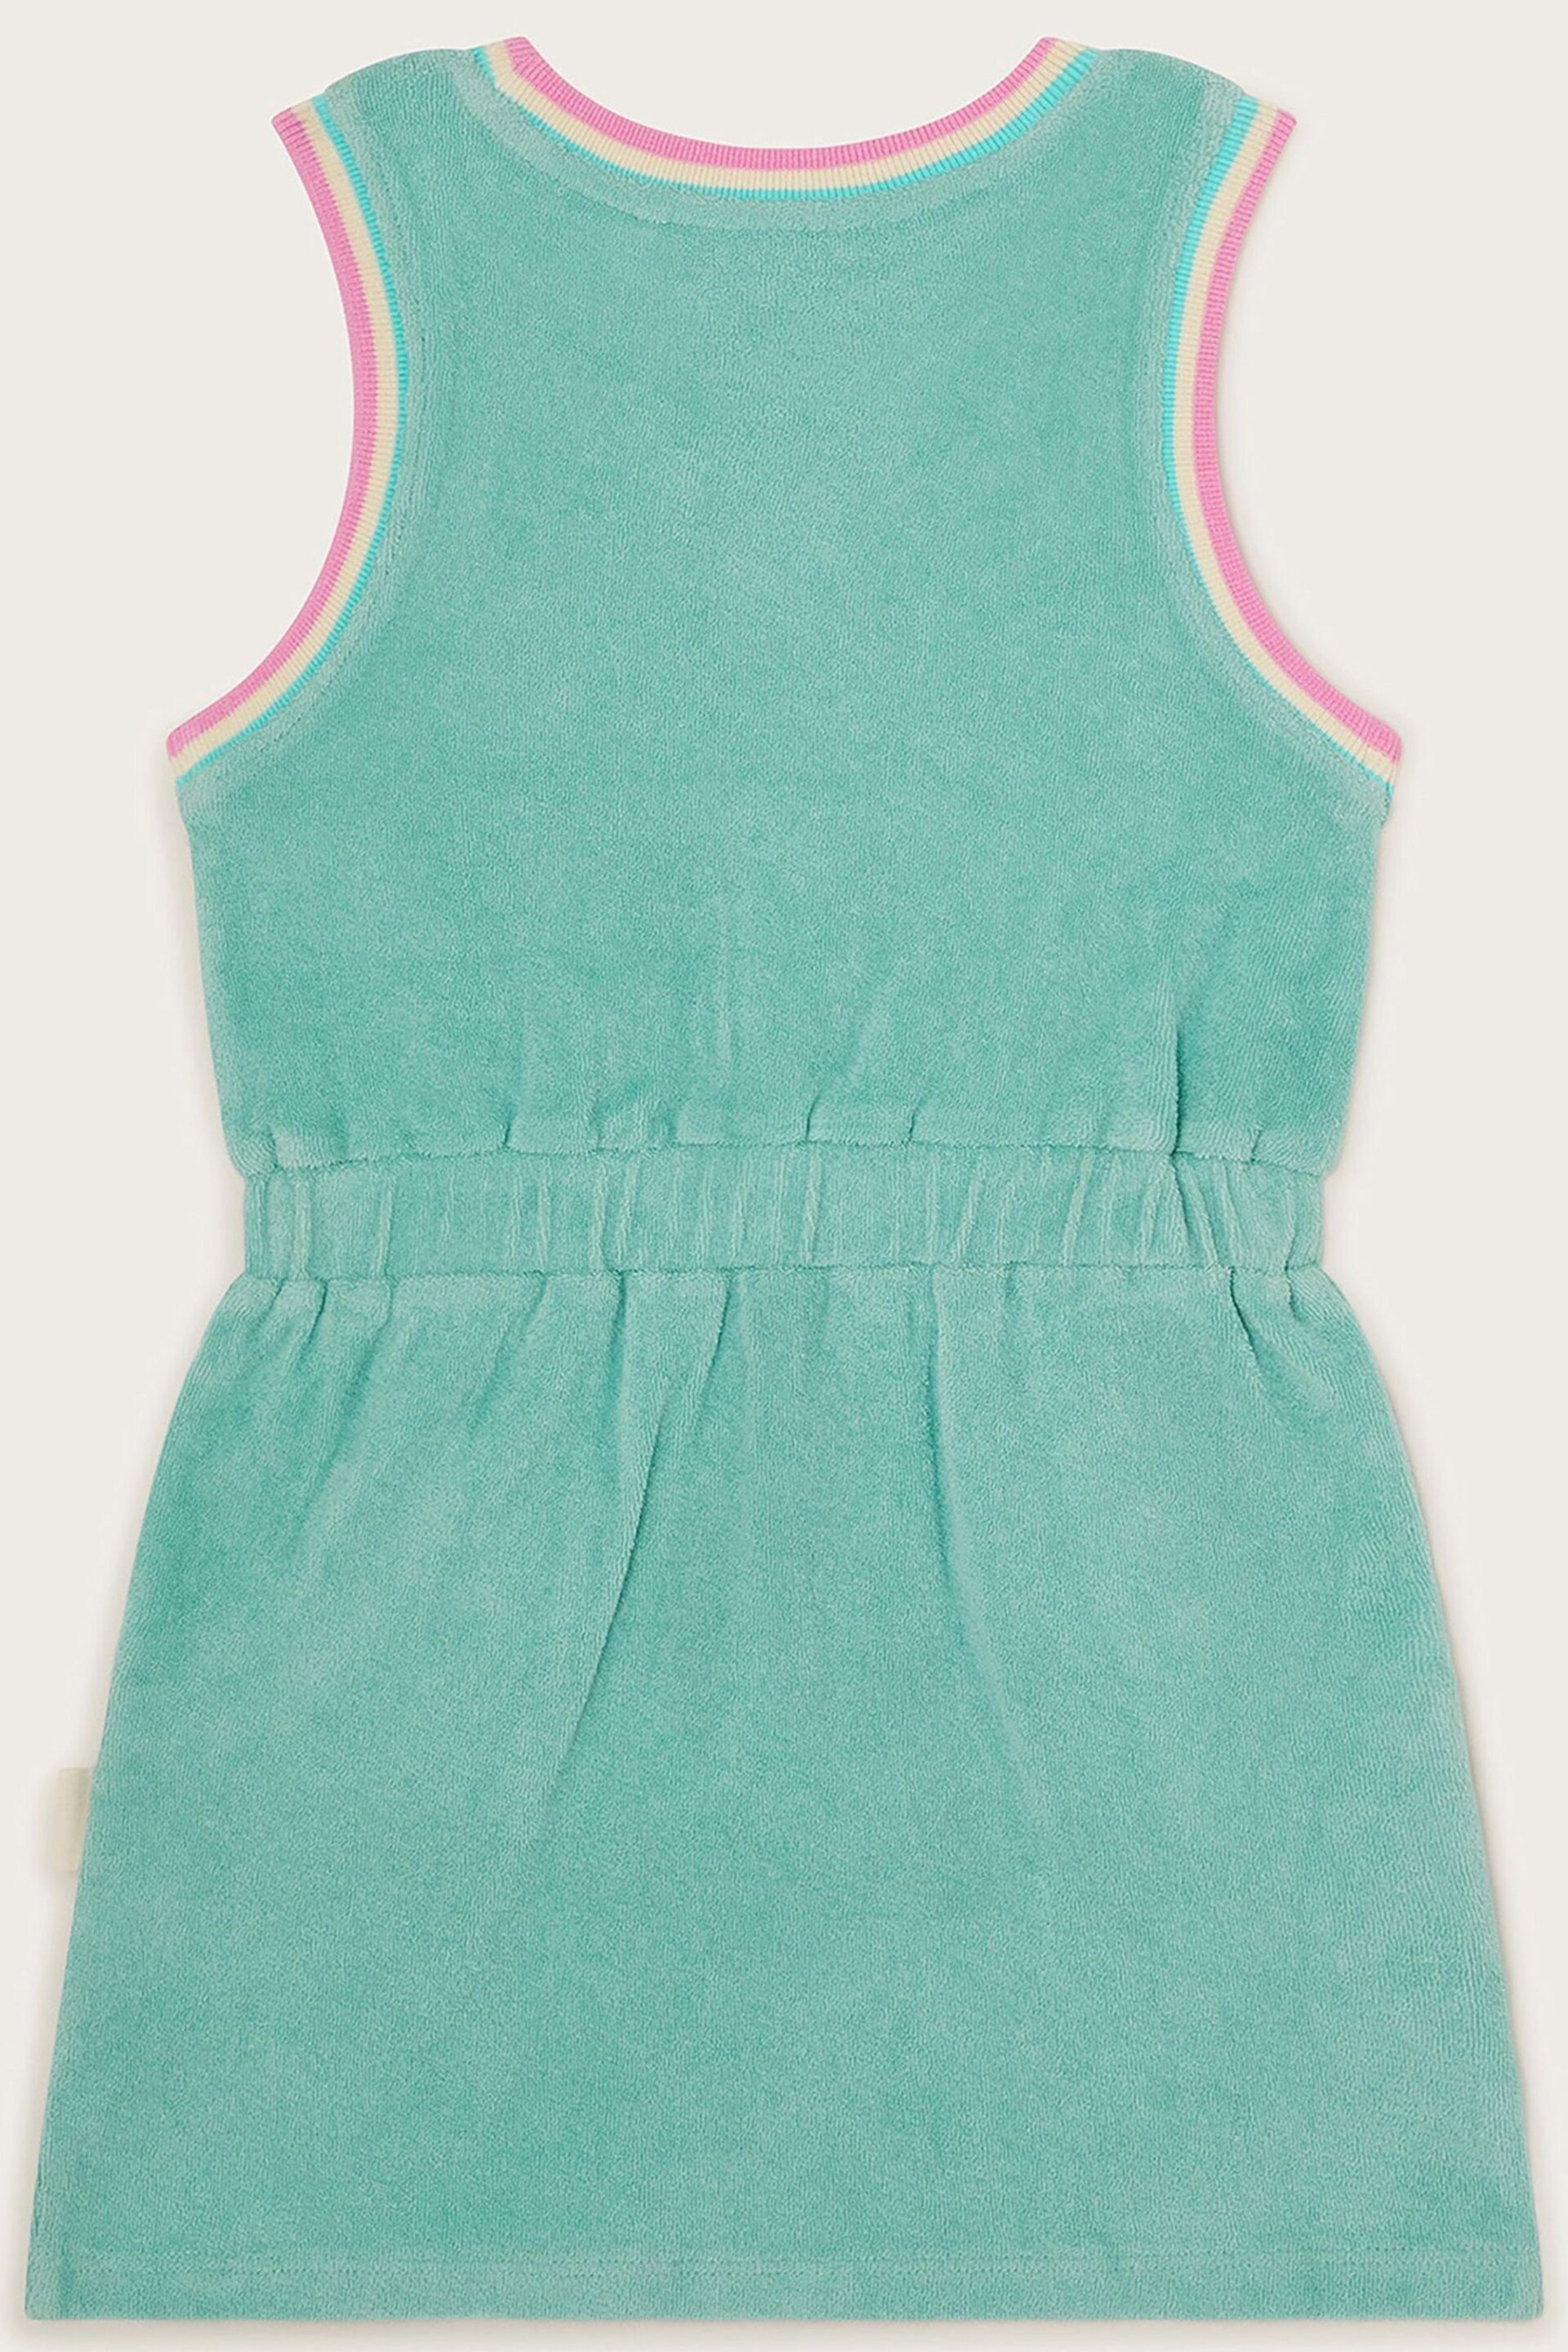 Monsoon Green Sporty Towelling Dress - Image 3 of 4